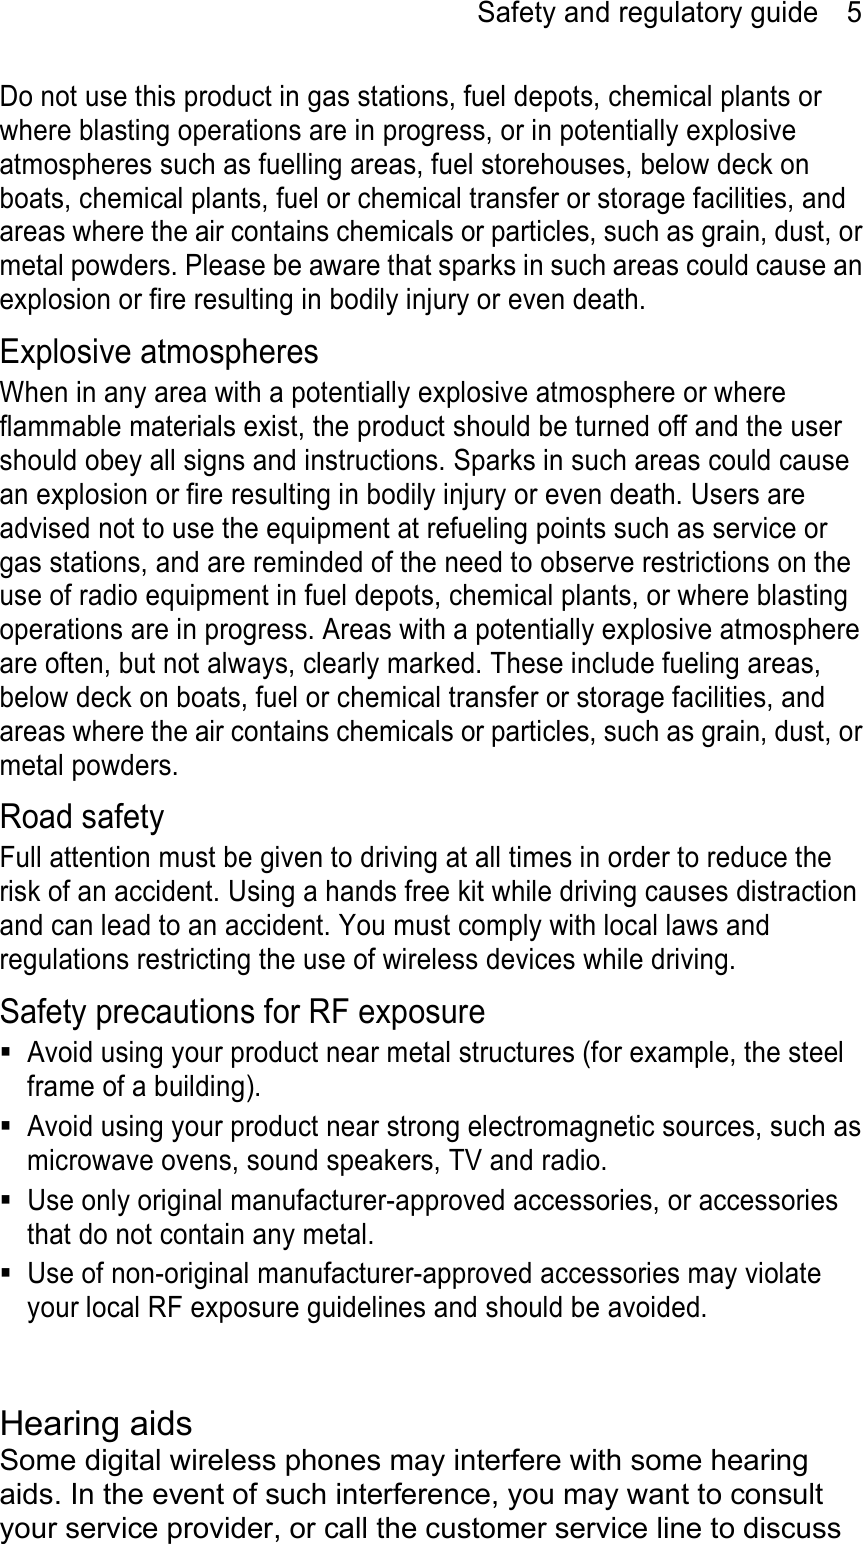 Safety and regulatory guide    5 Do not use this product in gas stations, fuel depots, chemical plants or where blasting operations are in progress, or in potentially explosive atmospheres such as fuelling areas, fuel storehouses, below deck on boats, chemical plants, fuel or chemical transfer or storage facilities, and areas where the air contains chemicals or particles, such as grain, dust, or metal powders. Please be aware that sparks in such areas could cause an explosion or fire resulting in bodily injury or even death. Explosive atmospheres When in any area with a potentially explosive atmosphere or where flammable materials exist, the product should be turned off and the user should obey all signs and instructions. Sparks in such areas could cause an explosion or fire resulting in bodily injury or even death. Users are advised not to use the equipment at refueling points such as service or gas stations, and are reminded of the need to observe restrictions on the use of radio equipment in fuel depots, chemical plants, or where blasting operations are in progress. Areas with a potentially explosive atmosphere are often, but not always, clearly marked. These include fueling areas, below deck on boats, fuel or chemical transfer or storage facilities, and areas where the air contains chemicals or particles, such as grain, dust, or metal powders. Road safety Full attention must be given to driving at all times in order to reduce the risk of an accident. Using a hands free kit while driving causes distraction and can lead to an accident. You must comply with local laws and regulations restricting the use of wireless devices while driving. Safety precautions for RF exposure   Avoid using your product near metal structures (for example, the steel frame of a building).   Avoid using your product near strong electromagnetic sources, such as microwave ovens, sound speakers, TV and radio.   Use only original manufacturer-approved accessories, or accessories that do not contain any metal.   Use of non-original manufacturer-approved accessories may violate your local RF exposure guidelines and should be avoided.   Hearing aids Some digital wireless phones may interfere with some hearing aids. In the event of such interference, you may want to consult your service provider, or call the customer service line to discuss 